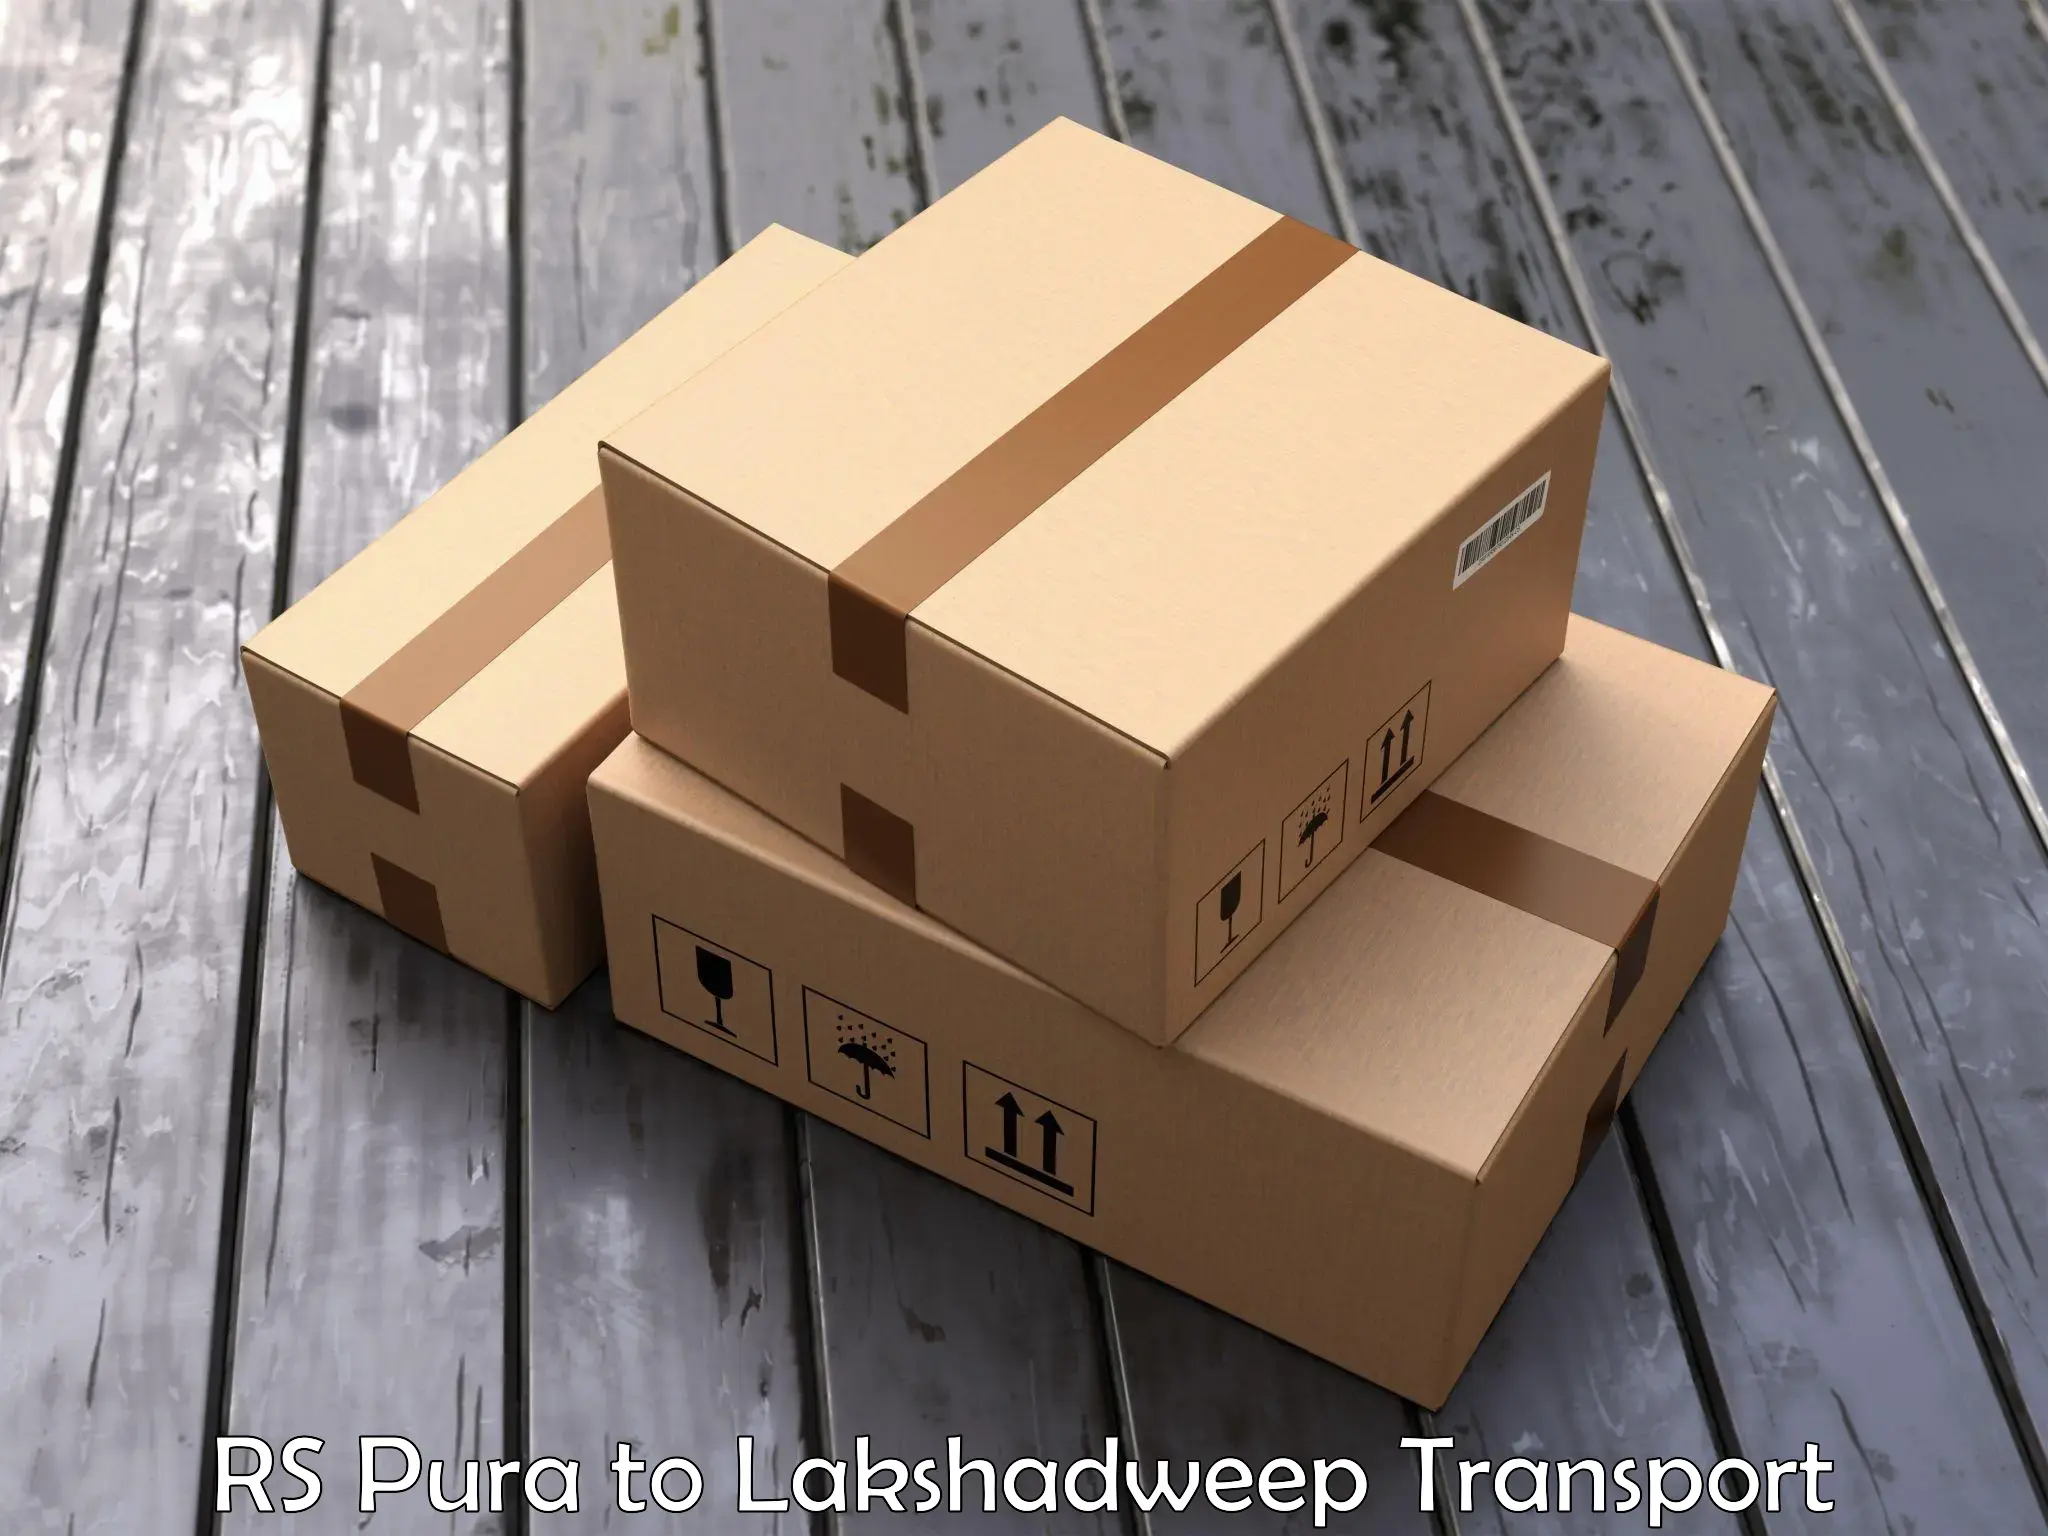 Road transport online services RS Pura to Lakshadweep